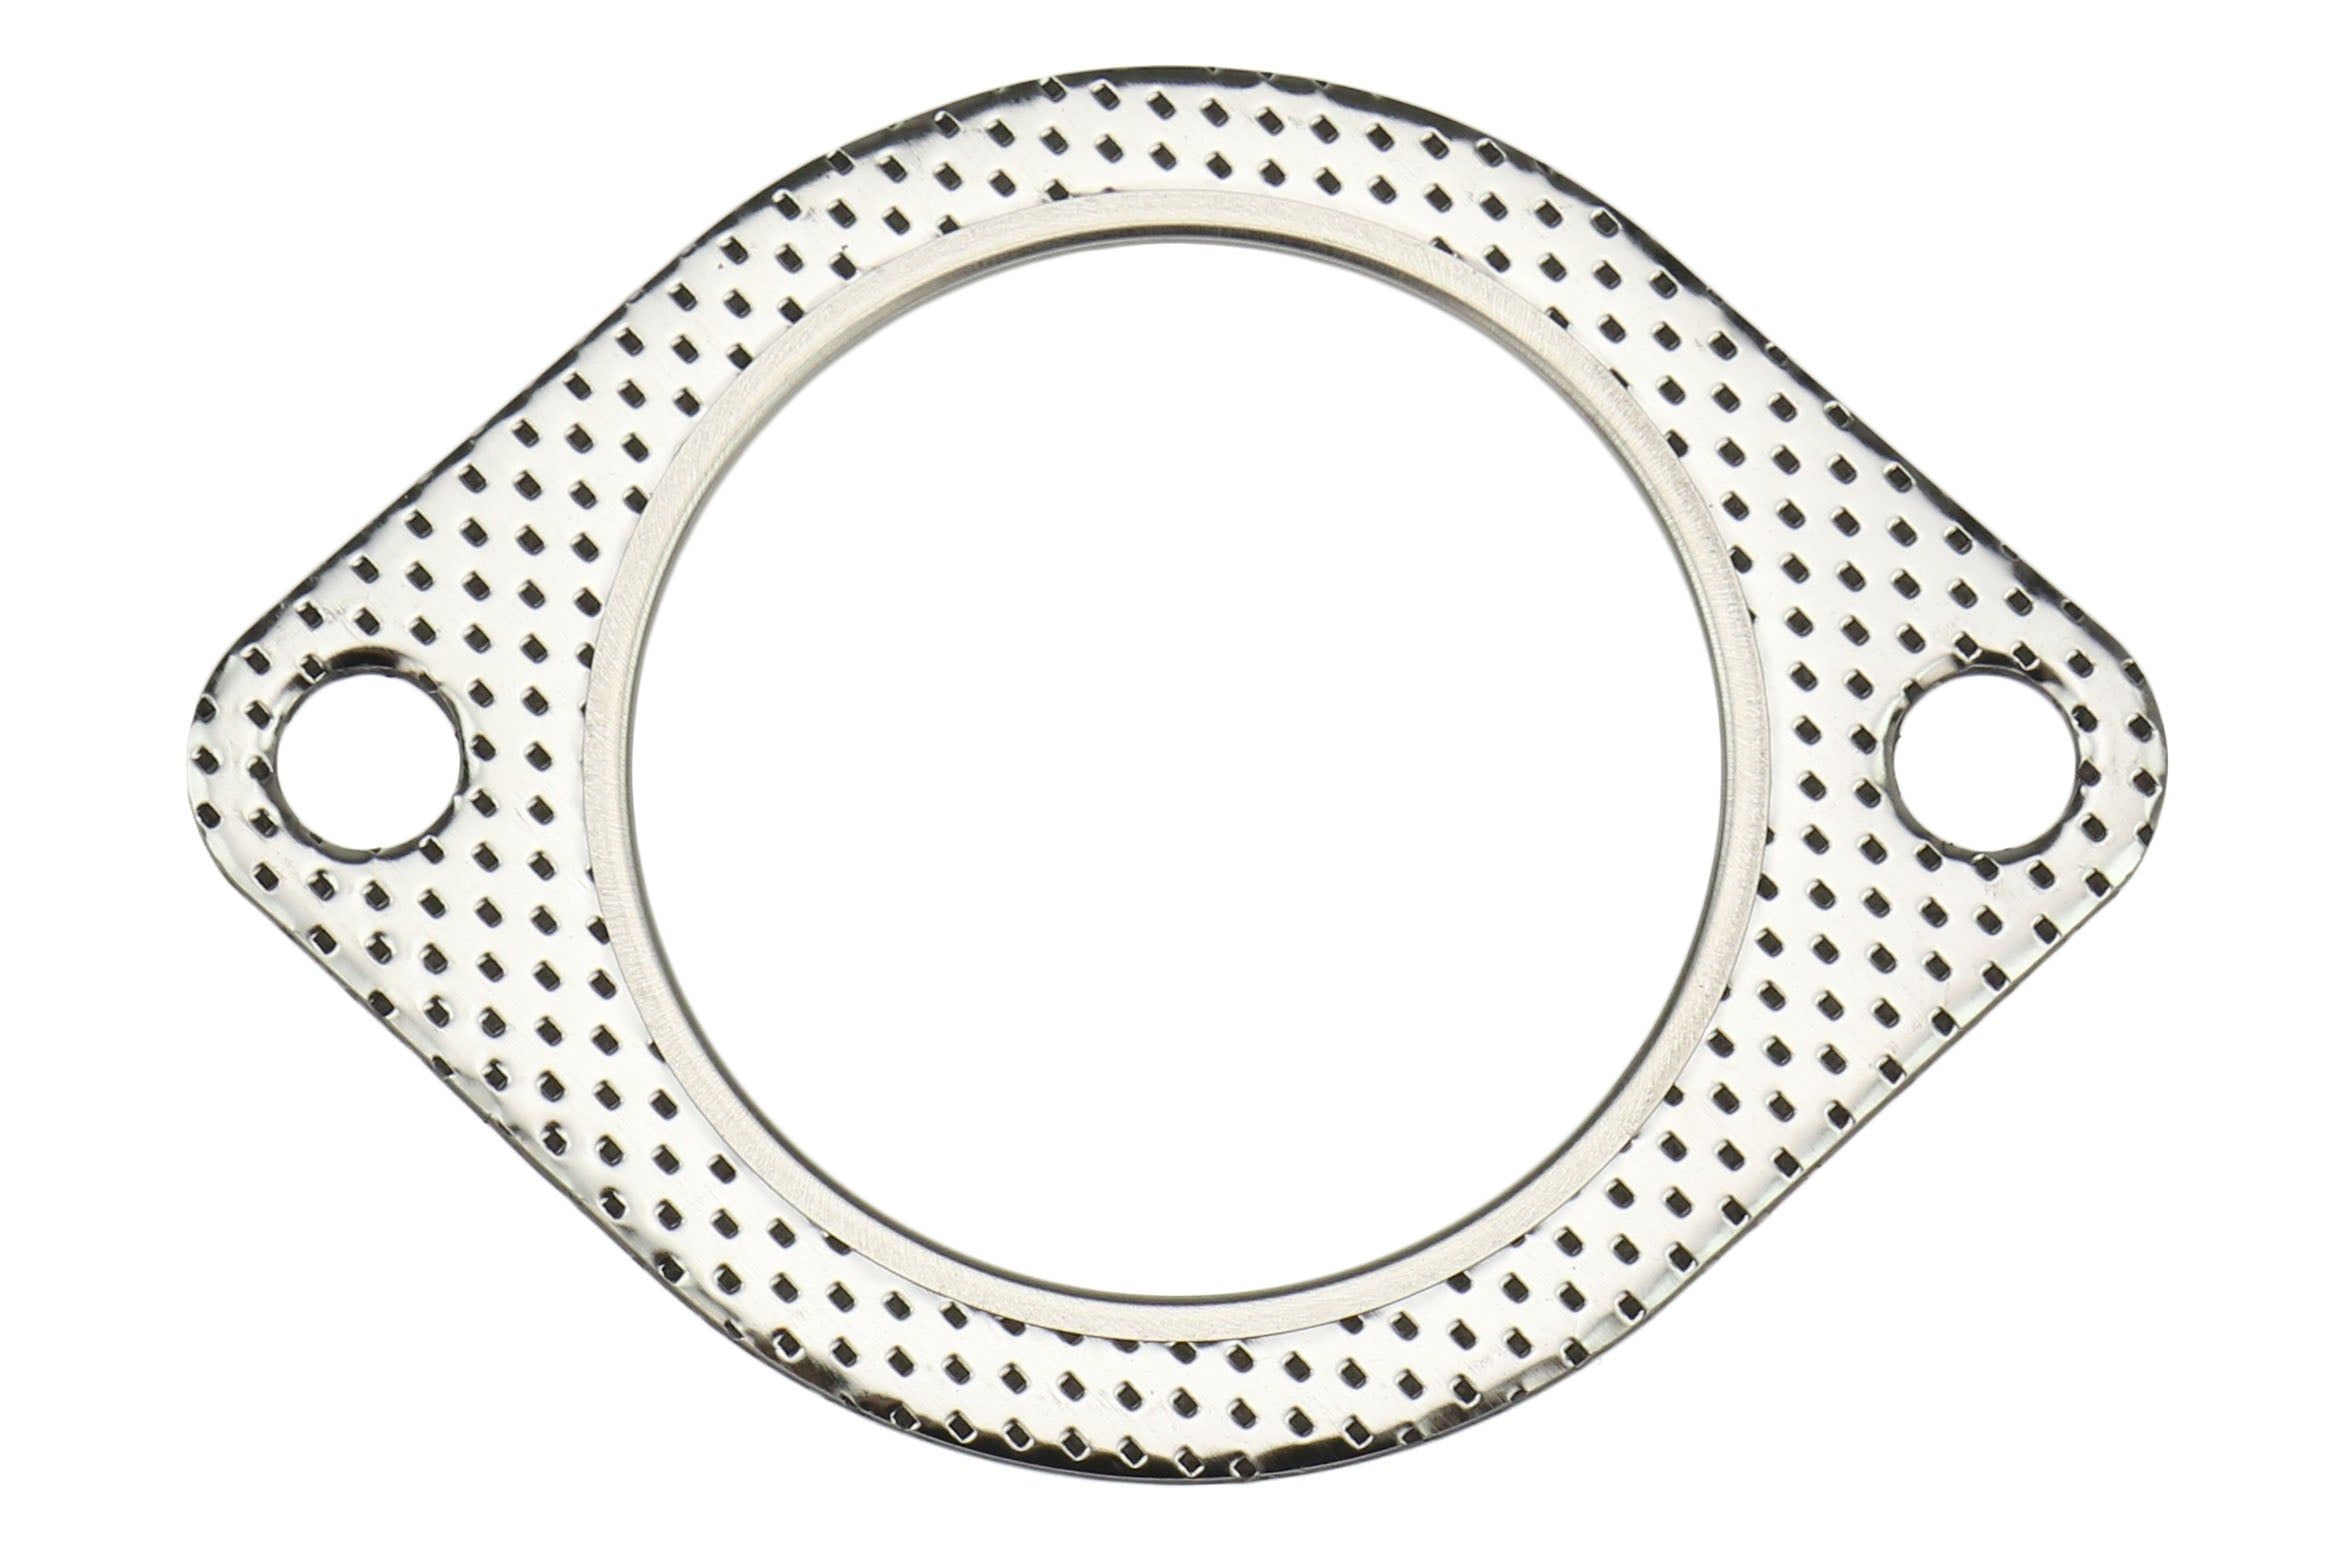 Greddy 70mm (2.75") Exhaust System Gasket (Round 2-Bolt Holes)